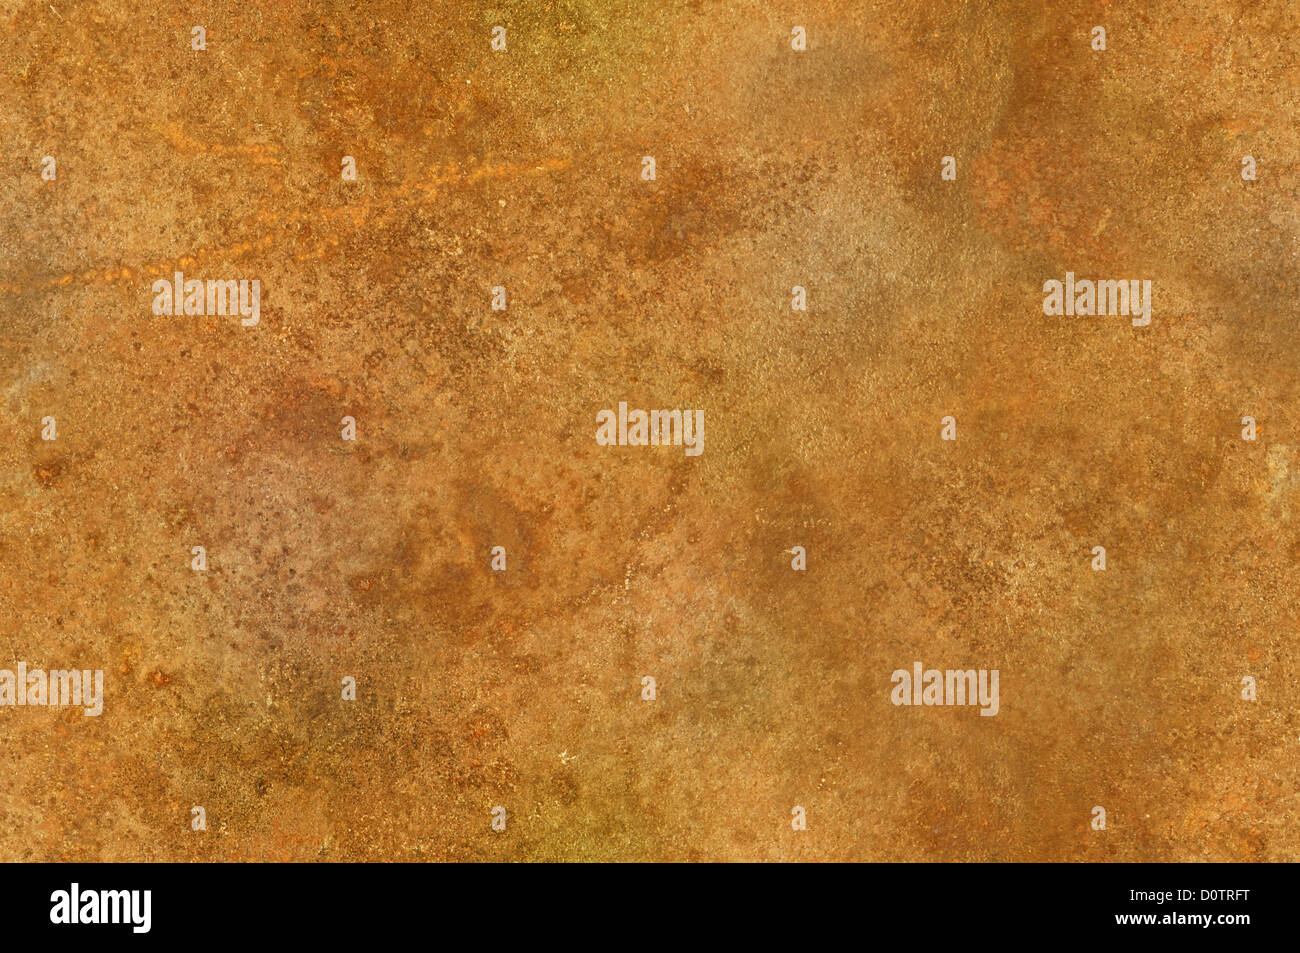 Grungy distressed rusty iron surface seamlessly tileable texture Stock Photo